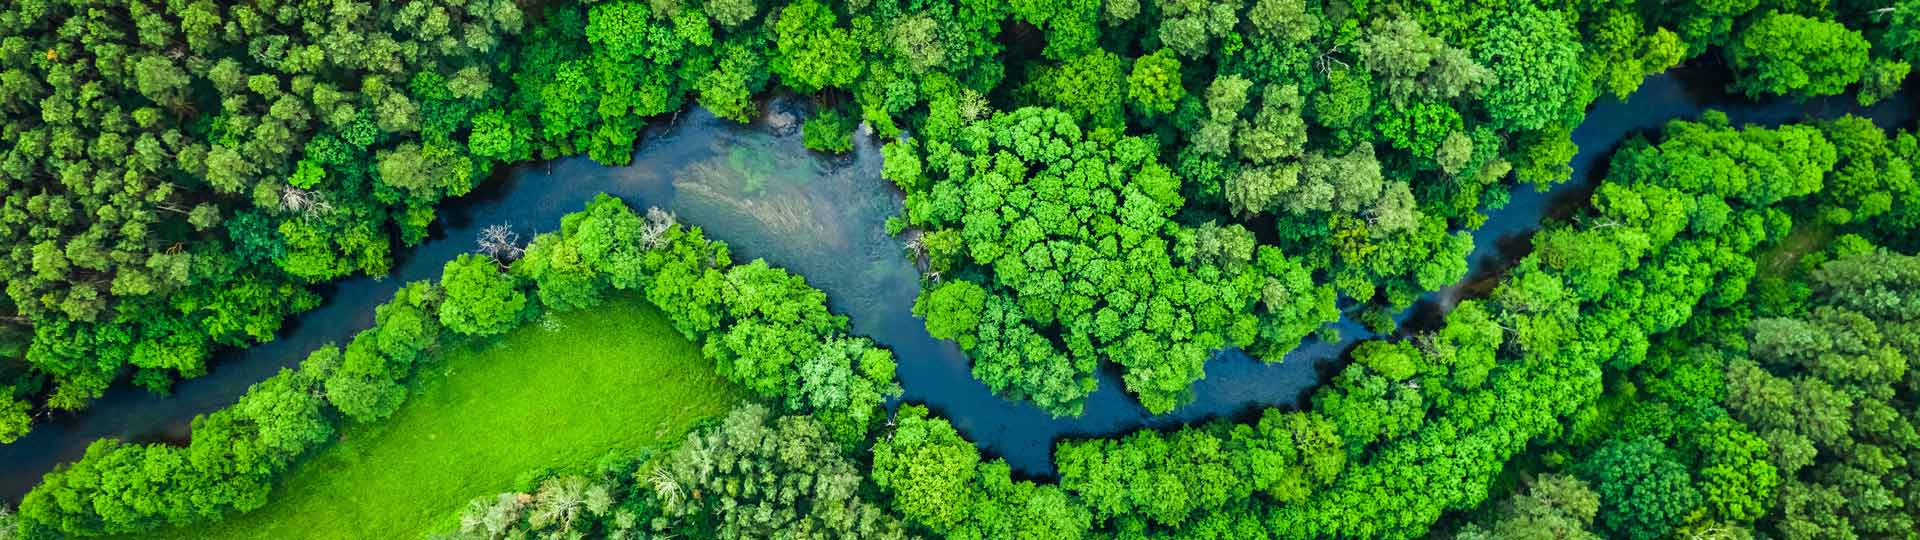 River and green forest in Tuchola natural park, aerial view